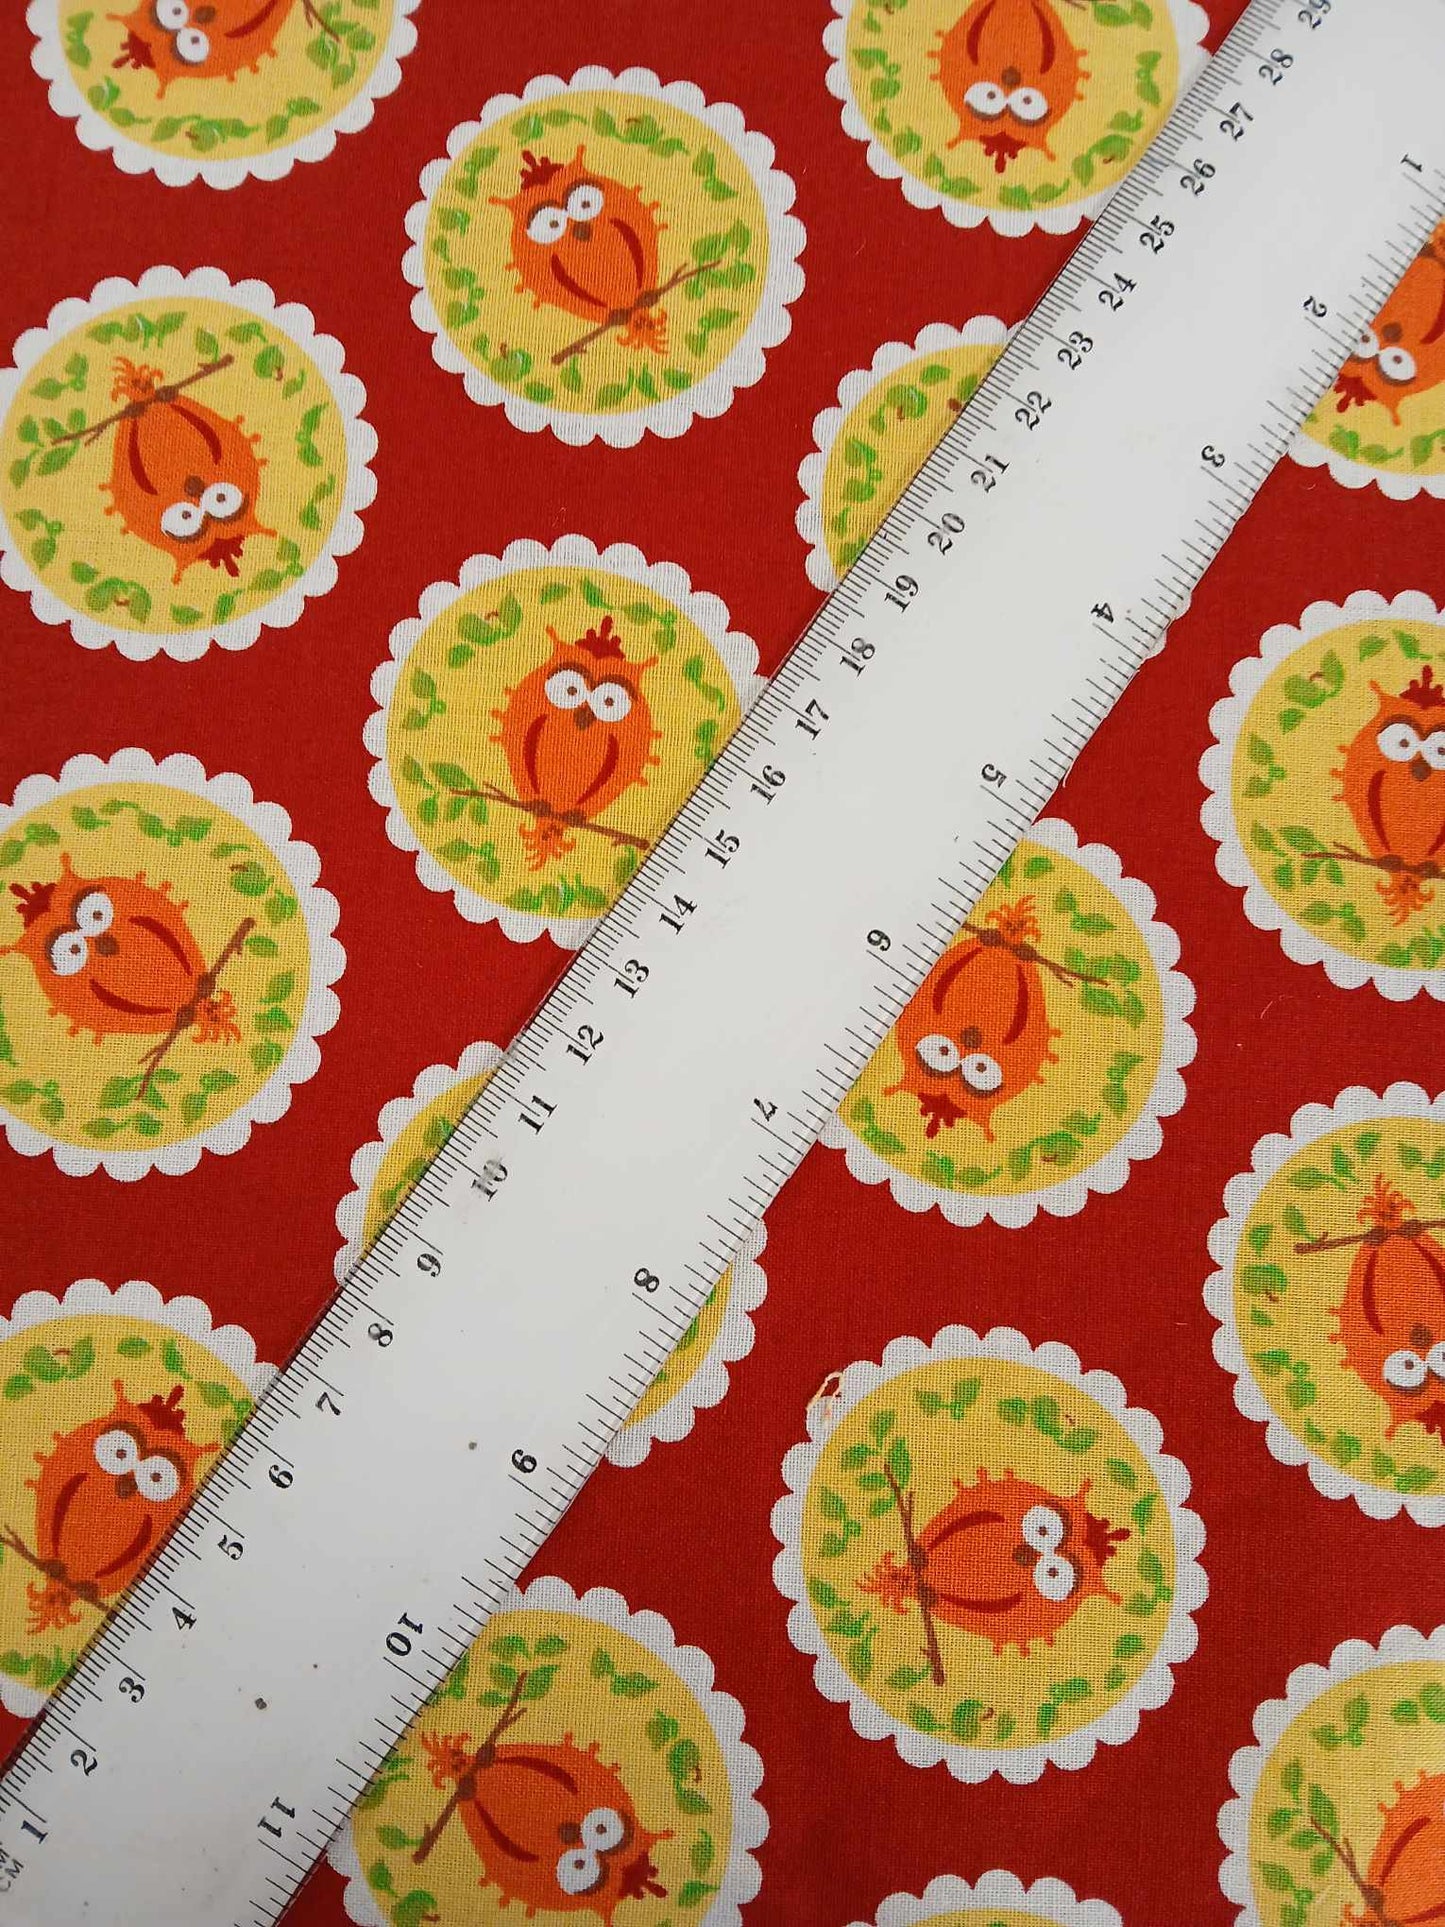 100% Cotton - Owls - Red/Orange/Yellow/White - 51" Wide - Sold By the Metre